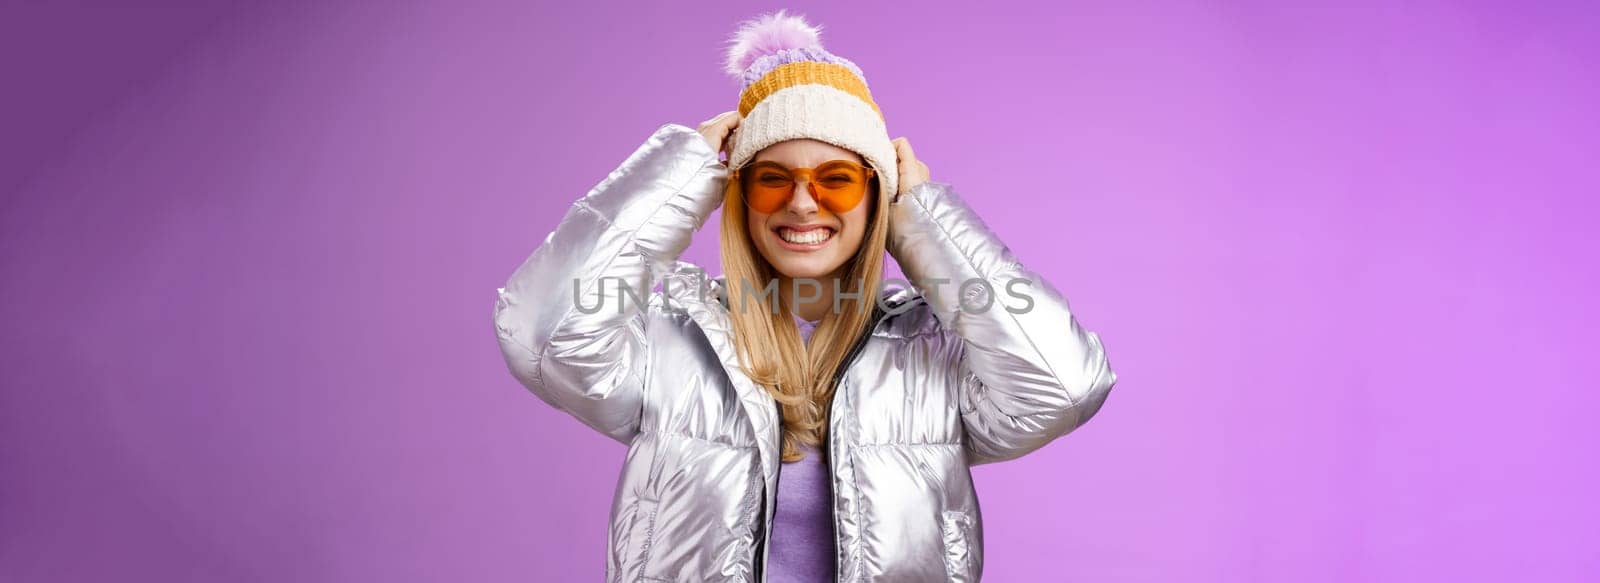 Energized daring sassy young attractive woman having fun friends winter trip learn snowboarding smiling cheeky enjoying vacation put-on hat wearing silver warm jacket sunglasses, purple background.